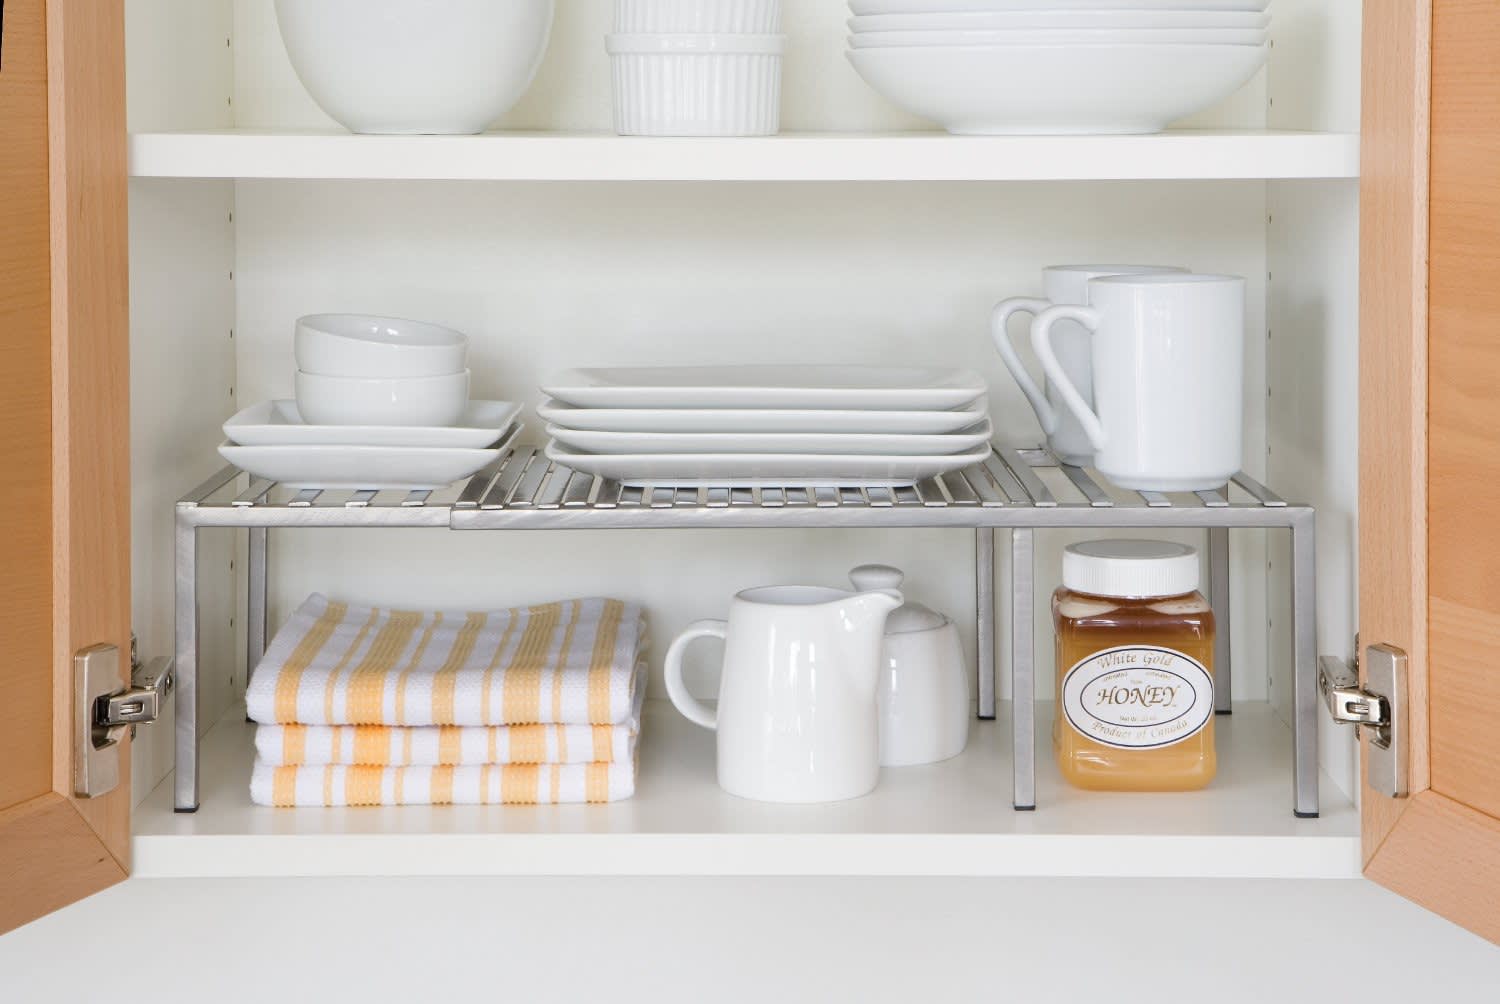 10 Ways to Maximize Cabinet Space in a Small Kitchen »